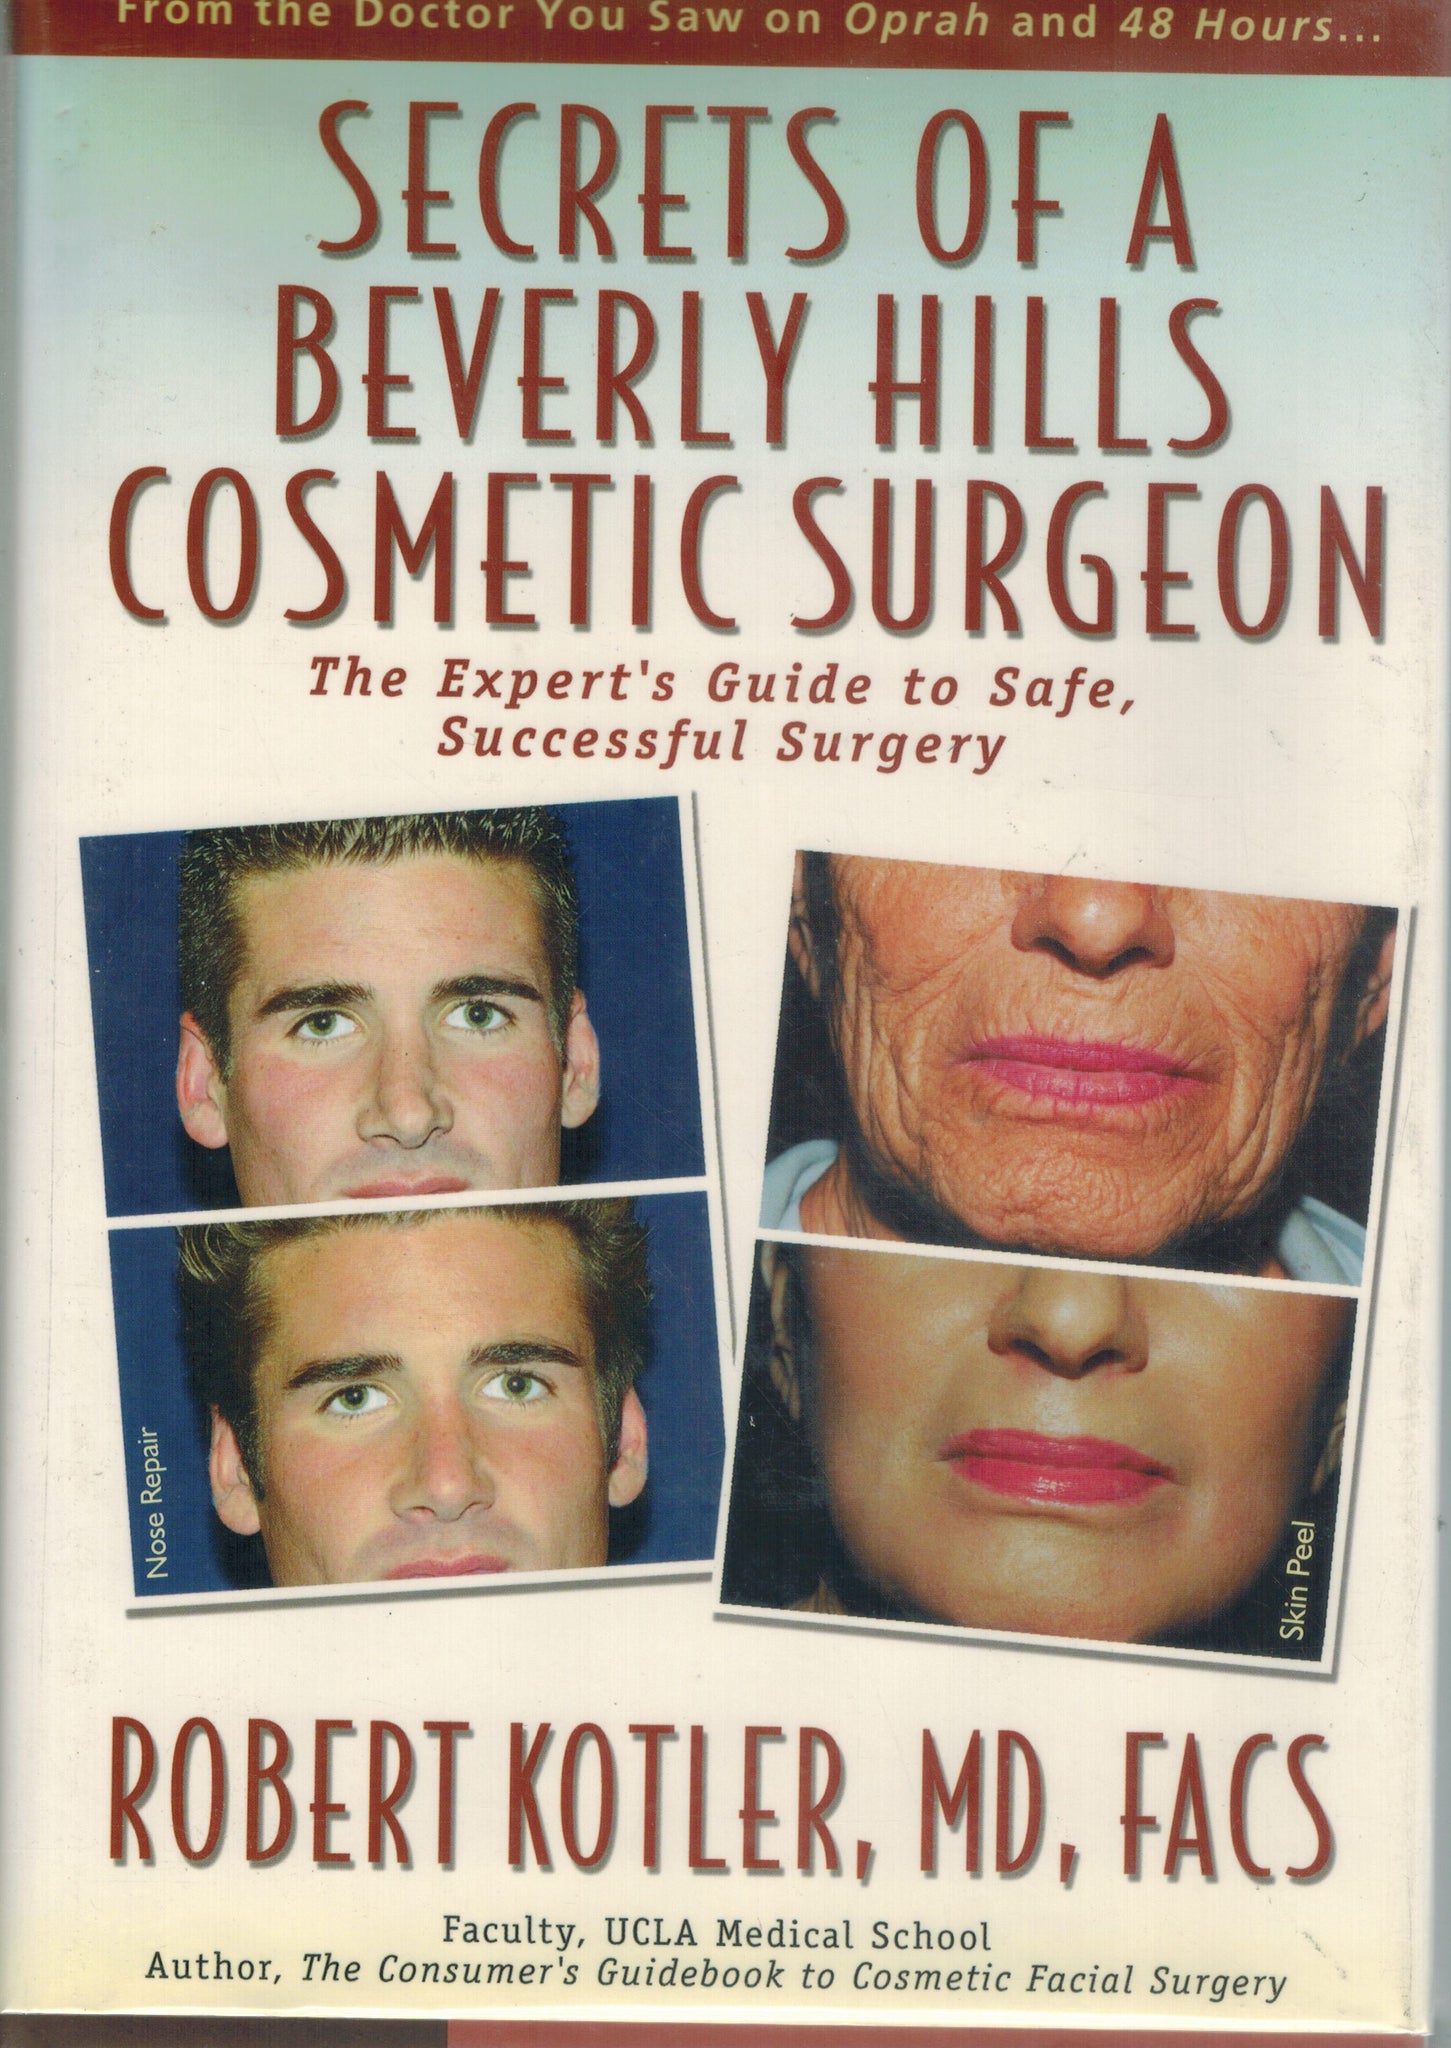 Secrets of a Beverly Hills Cosmetic Surgeon